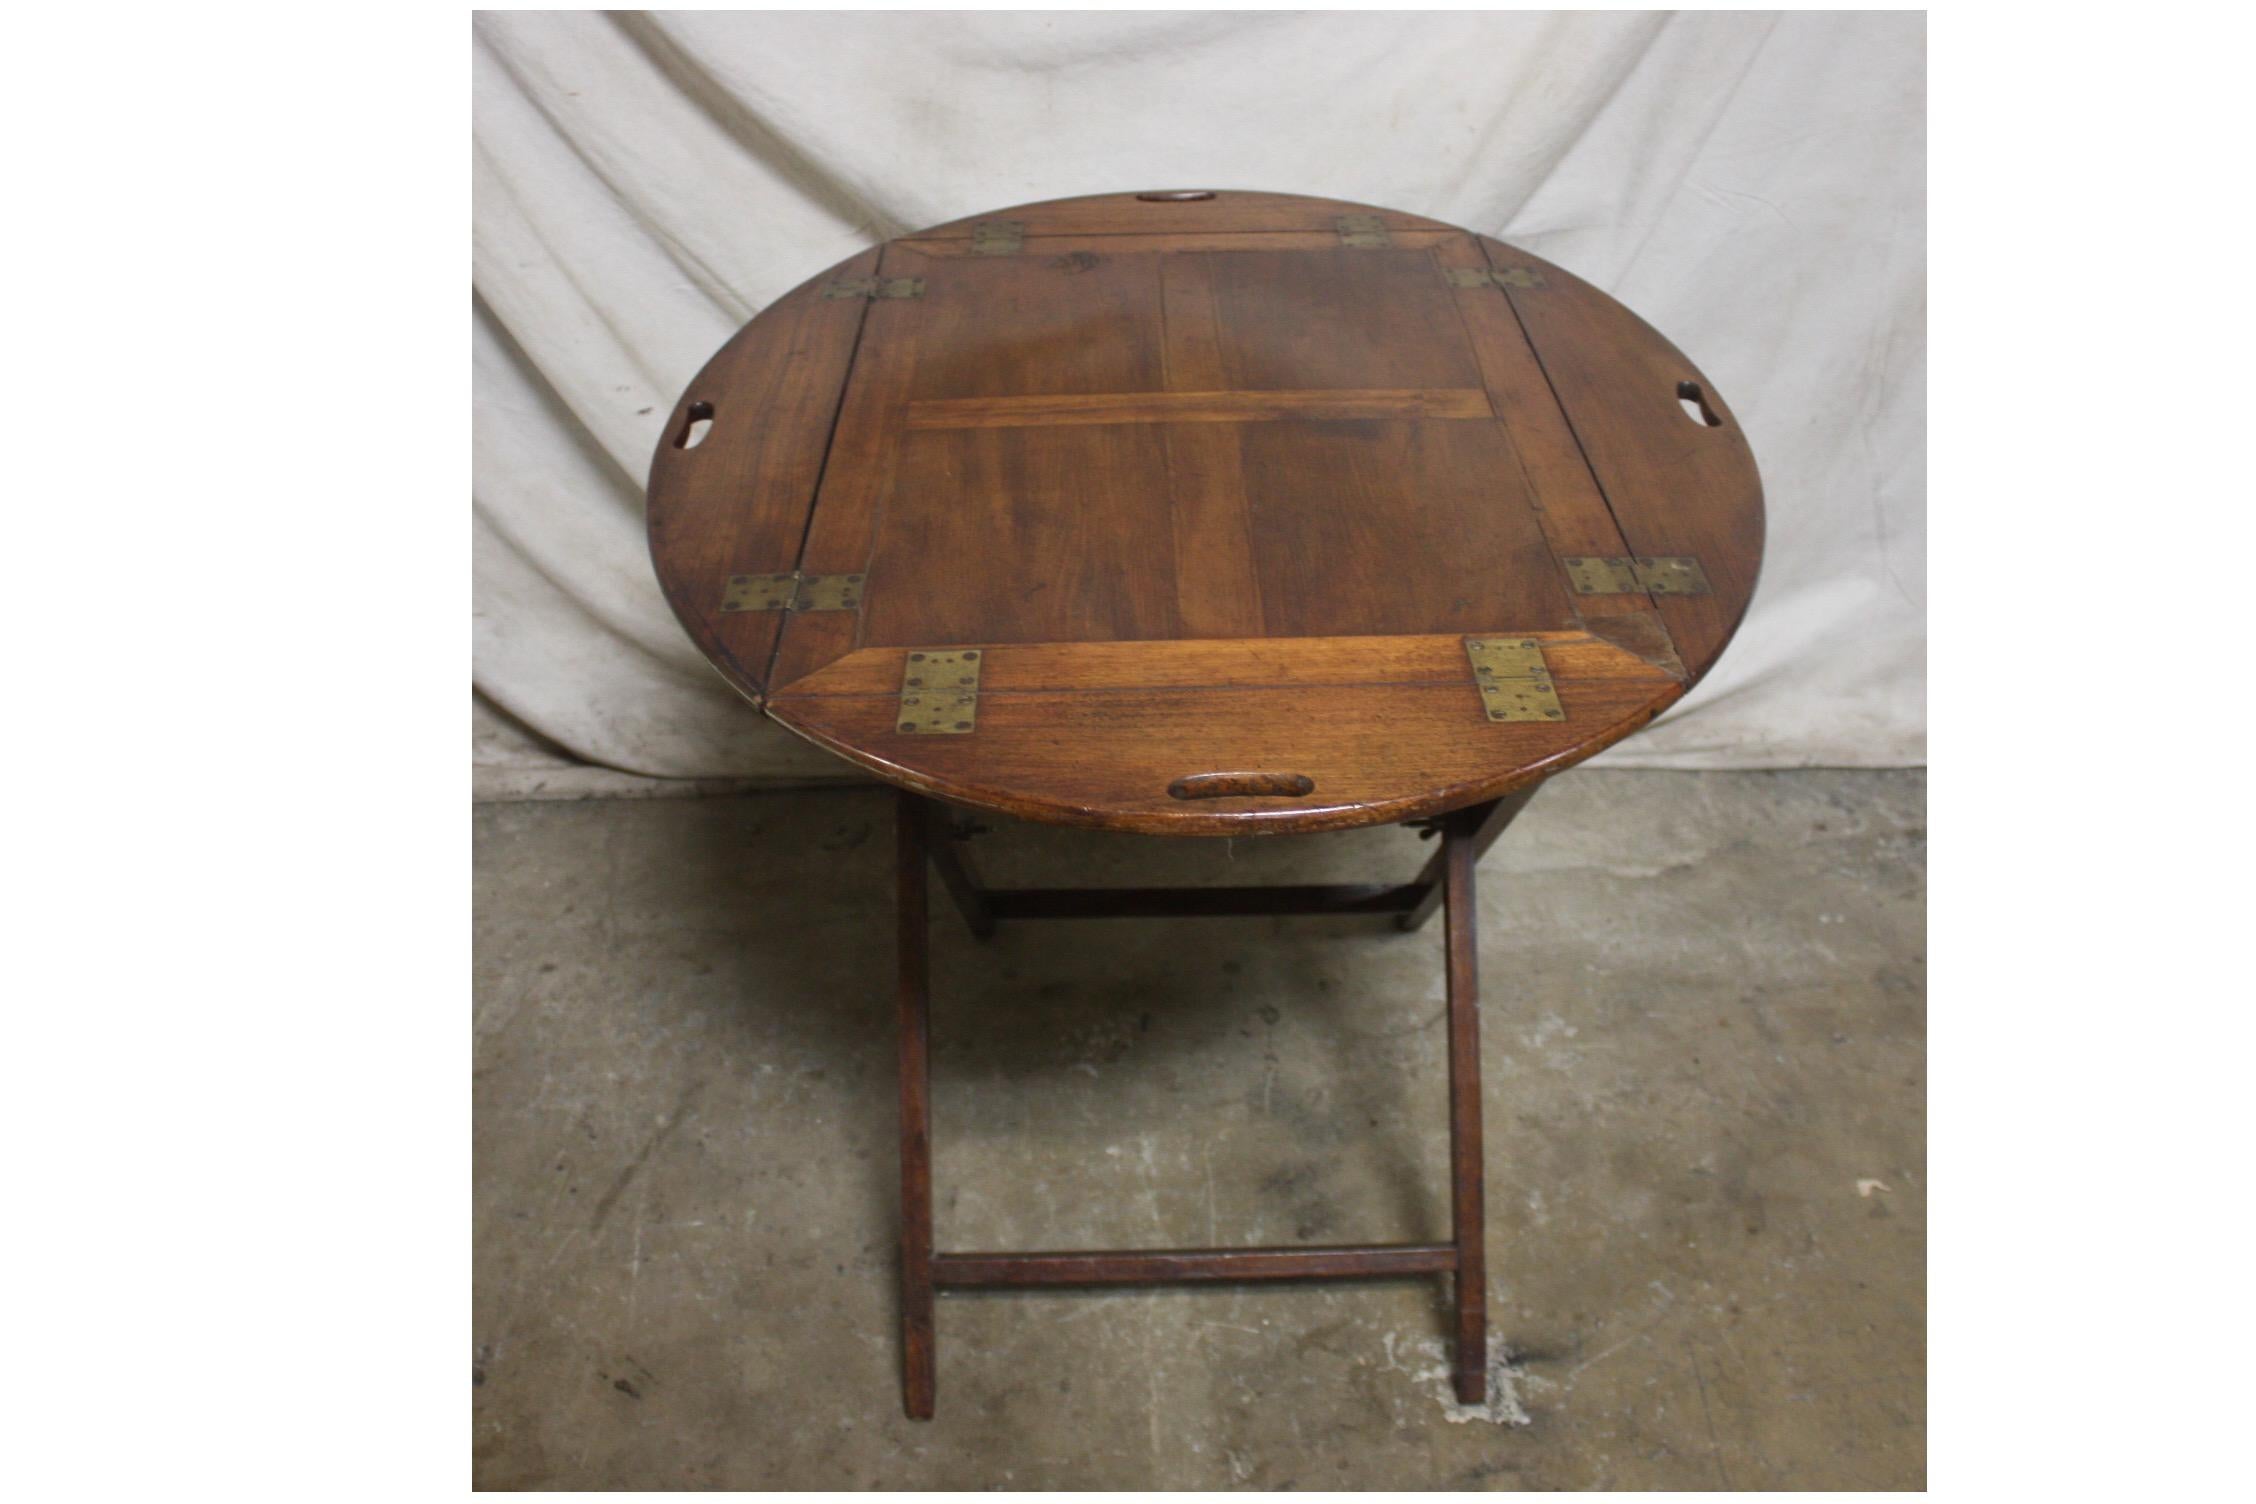 19th Century French Boat Table In Good Condition For Sale In Stockbridge, GA